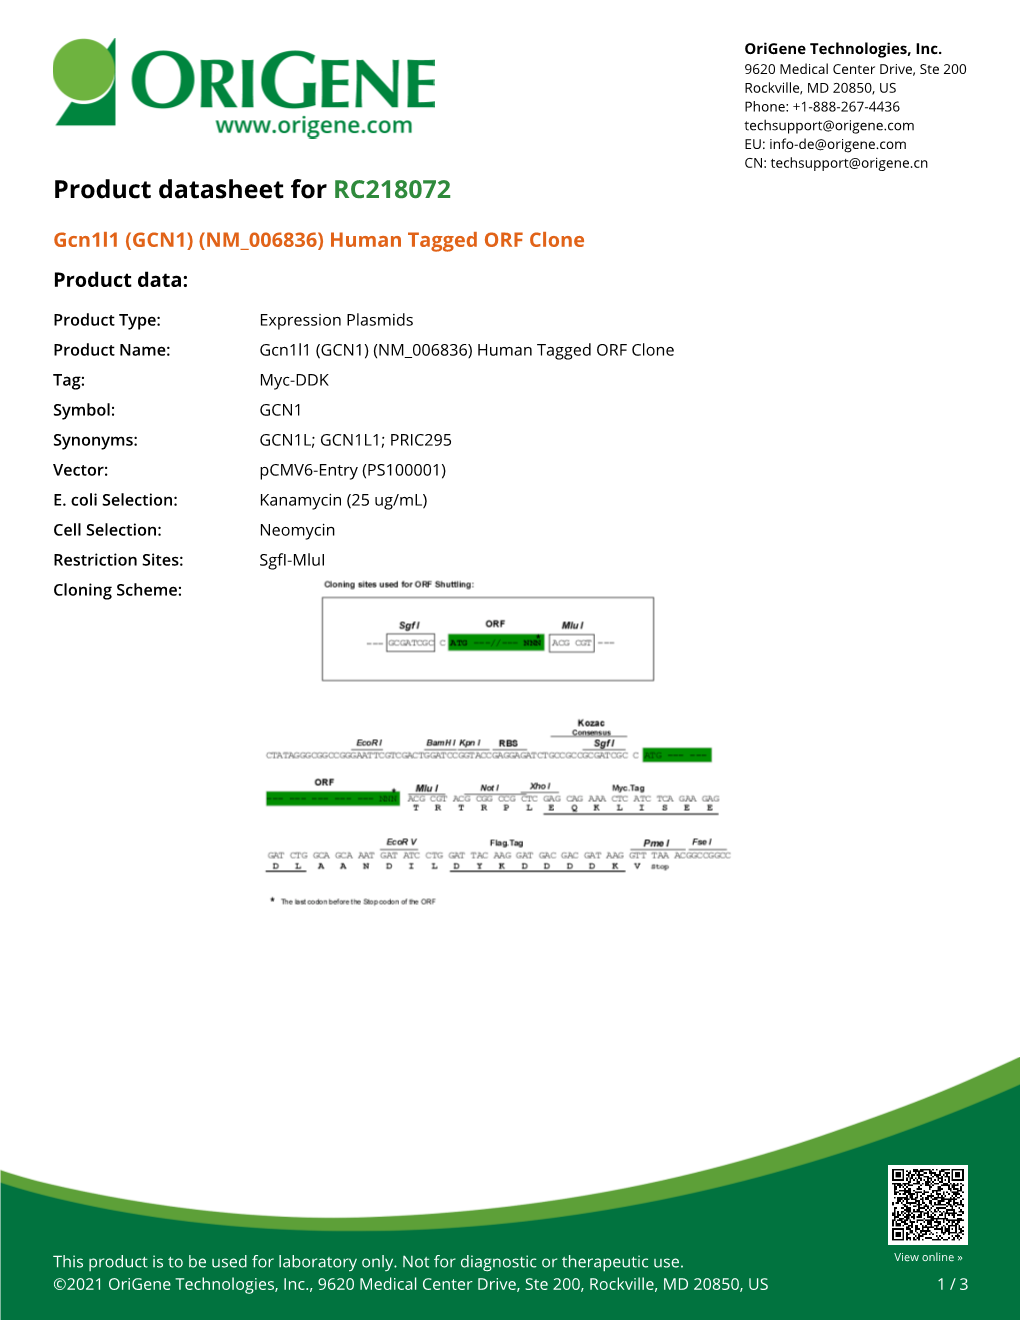 Gcn1l1 (GCN1) (NM 006836) Human Tagged ORF Clone Product Data